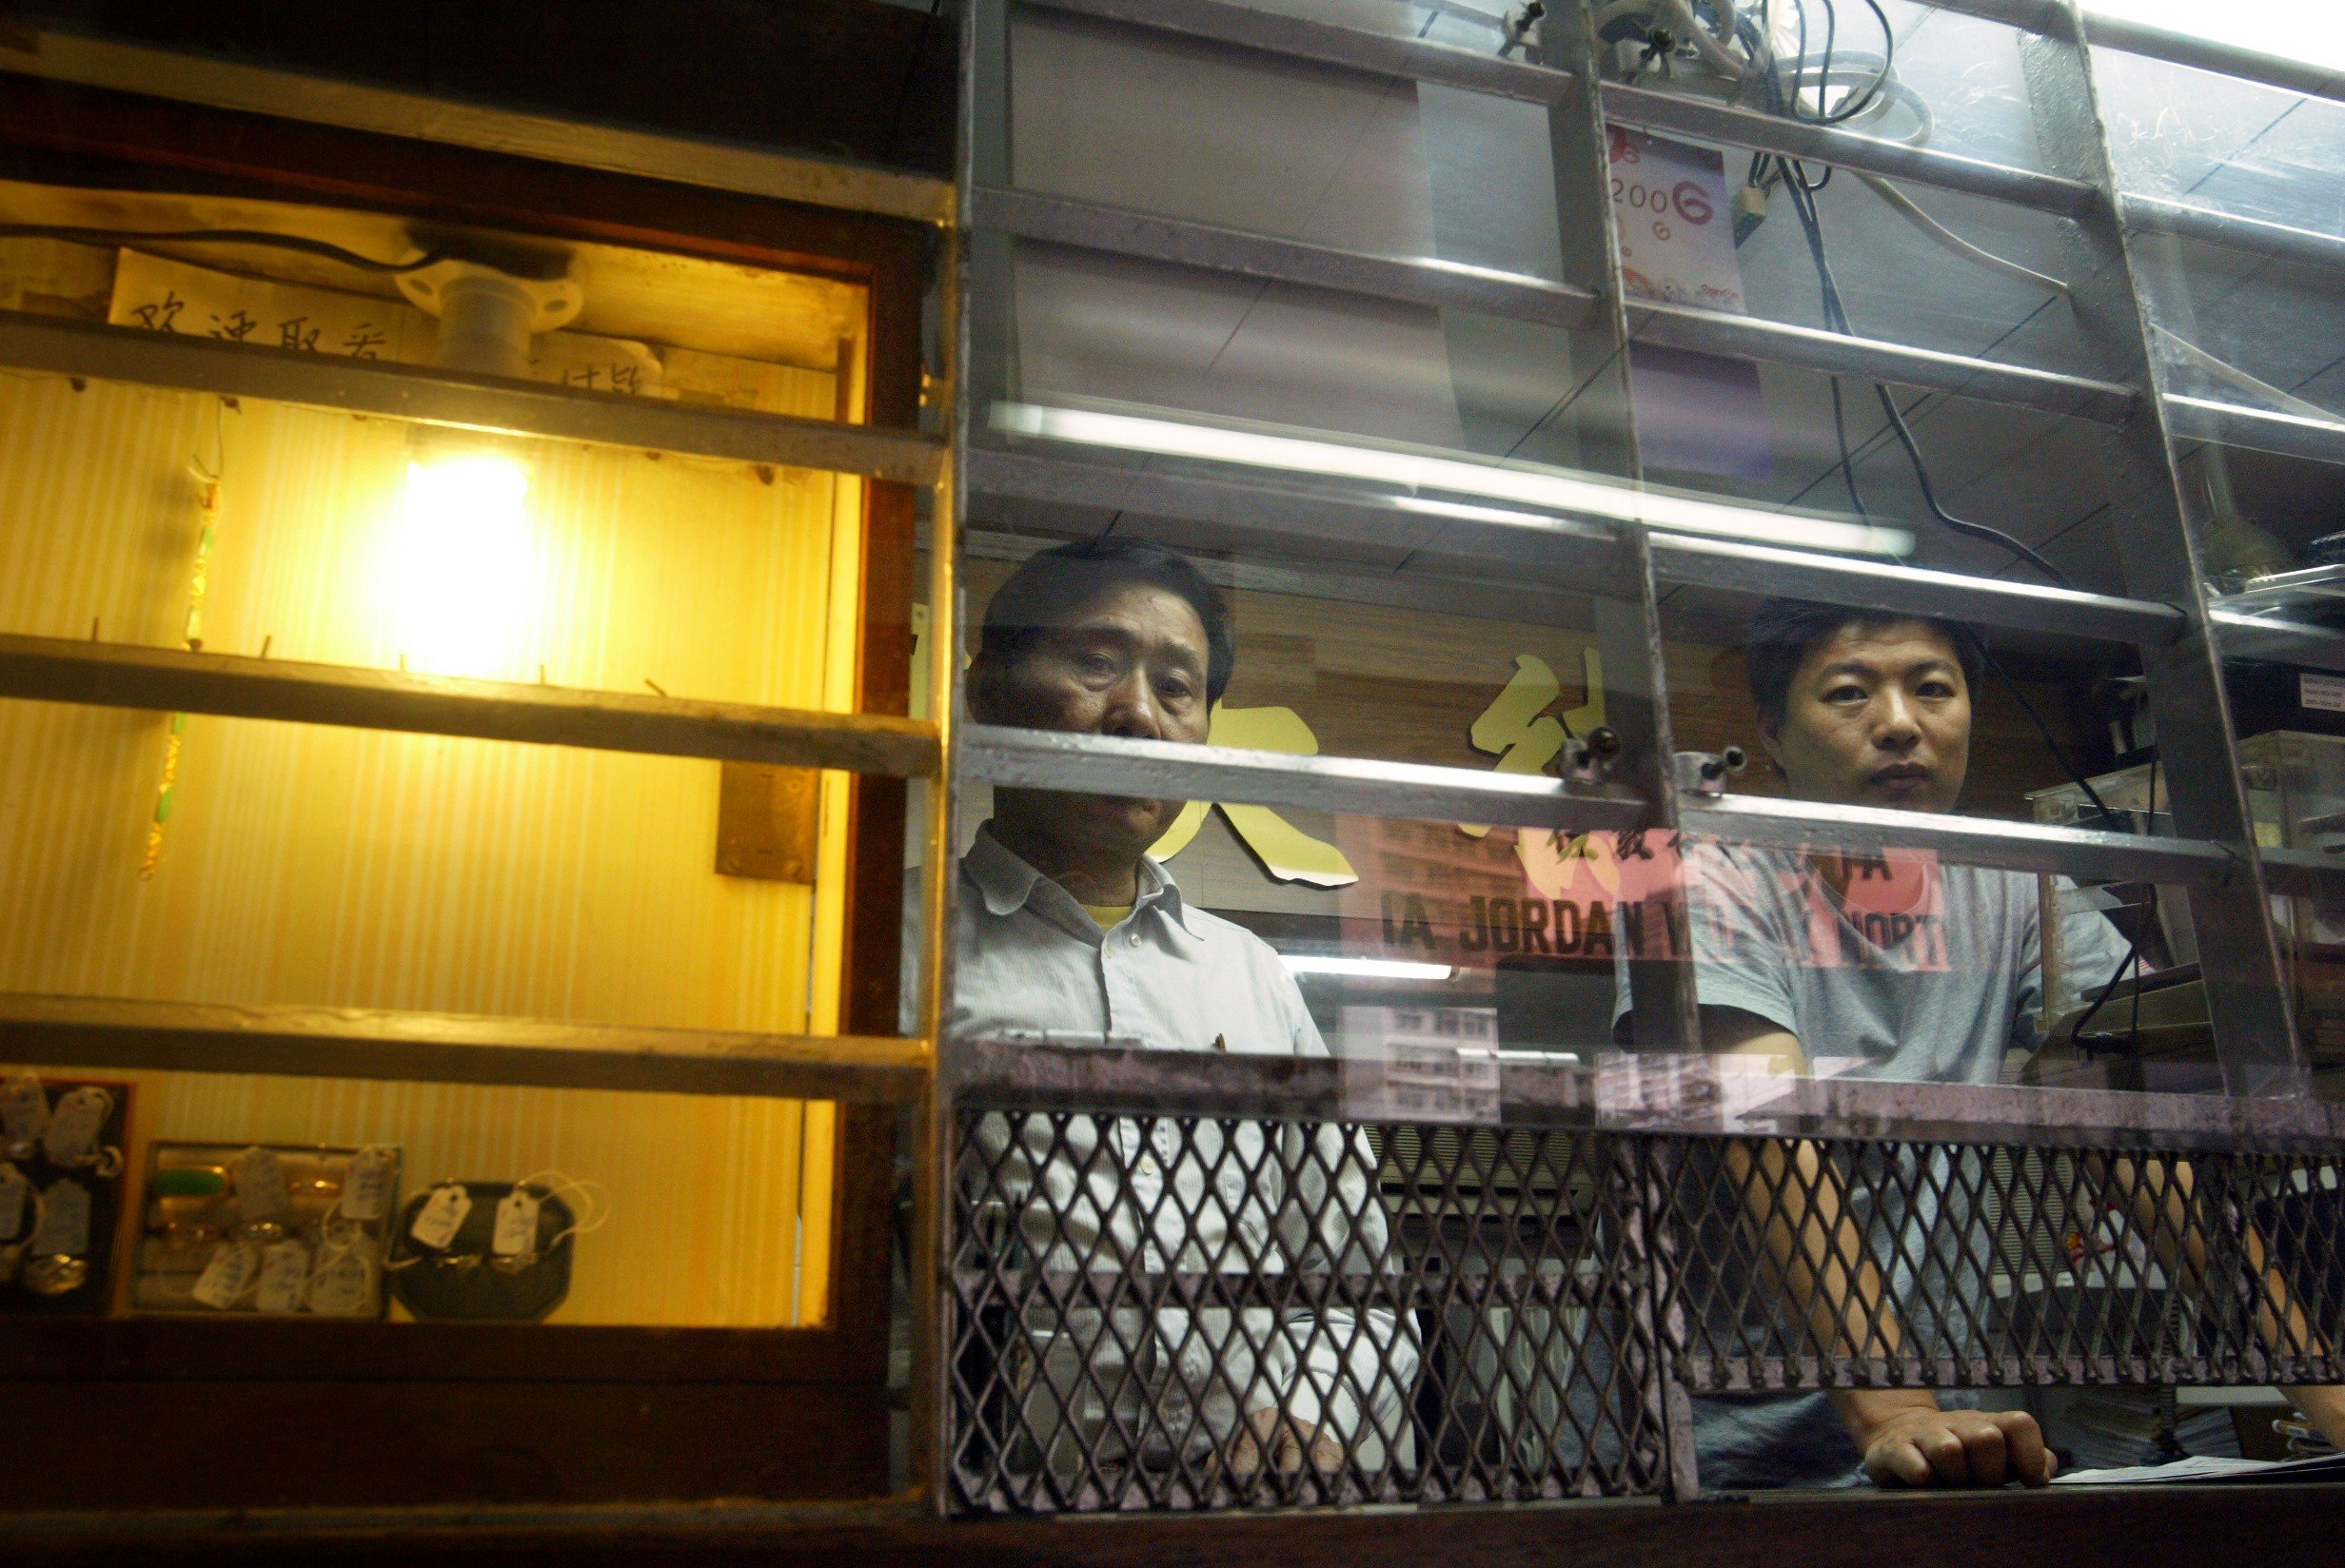 Pawn shops have been popular in Hong Kong for decades for securing quick money. Photo: Dustin Shum